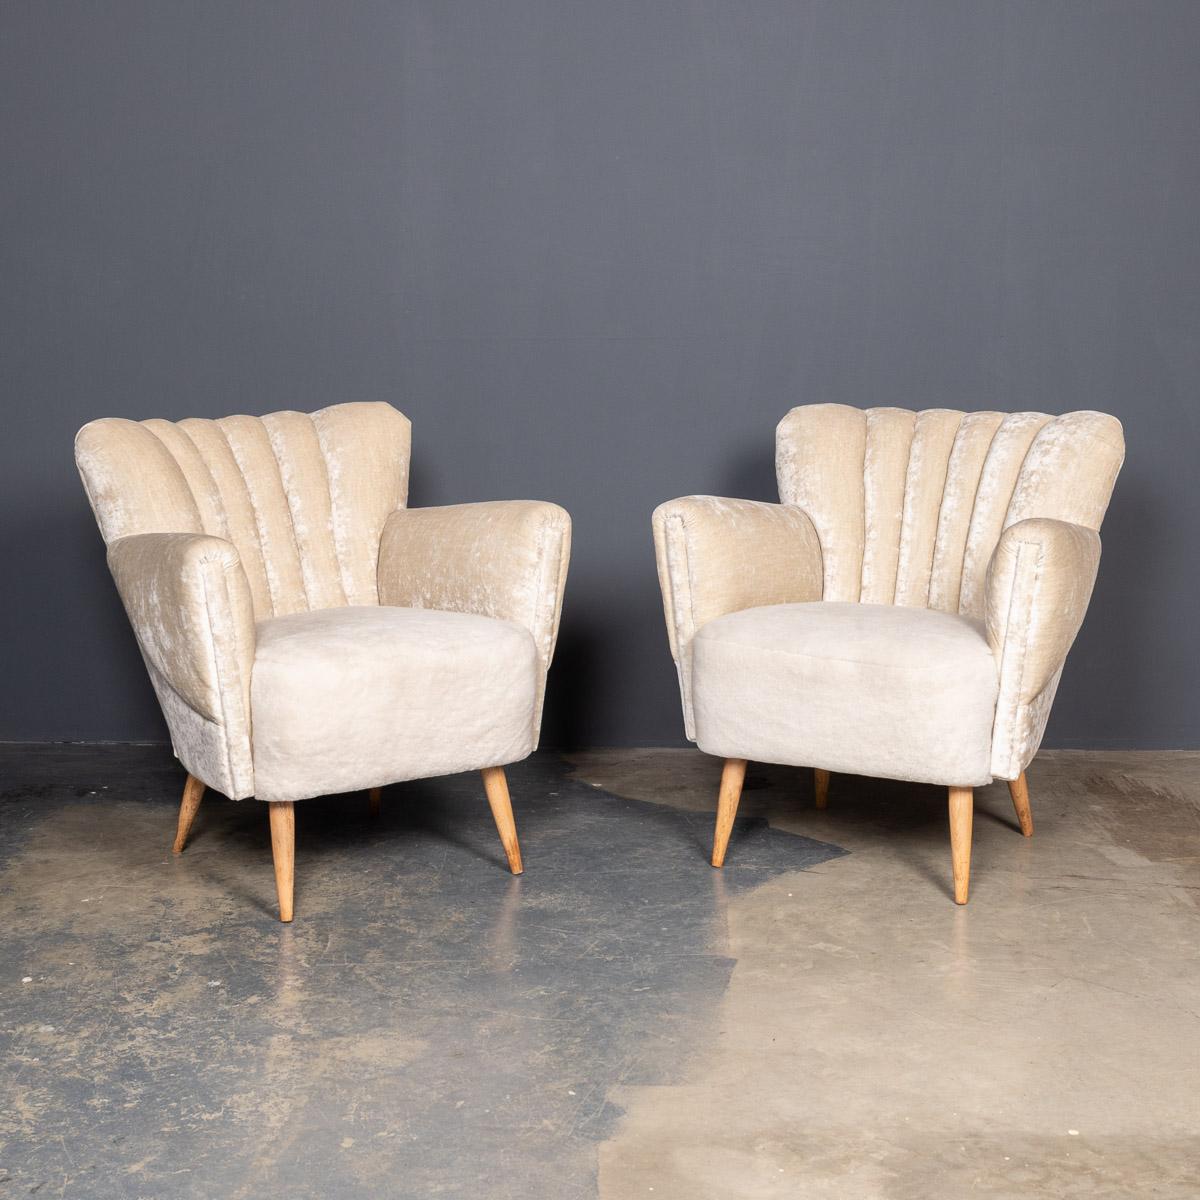 Elegant mid-20th century pair of boudoir occasional chairs with a sweeping shell shaped back. These pieces have been reupholstered in cream crushed velvet, with a soft sheepskin seat.

Measures: Height: 76cm
Depth: 60cm
Width: 74cm.